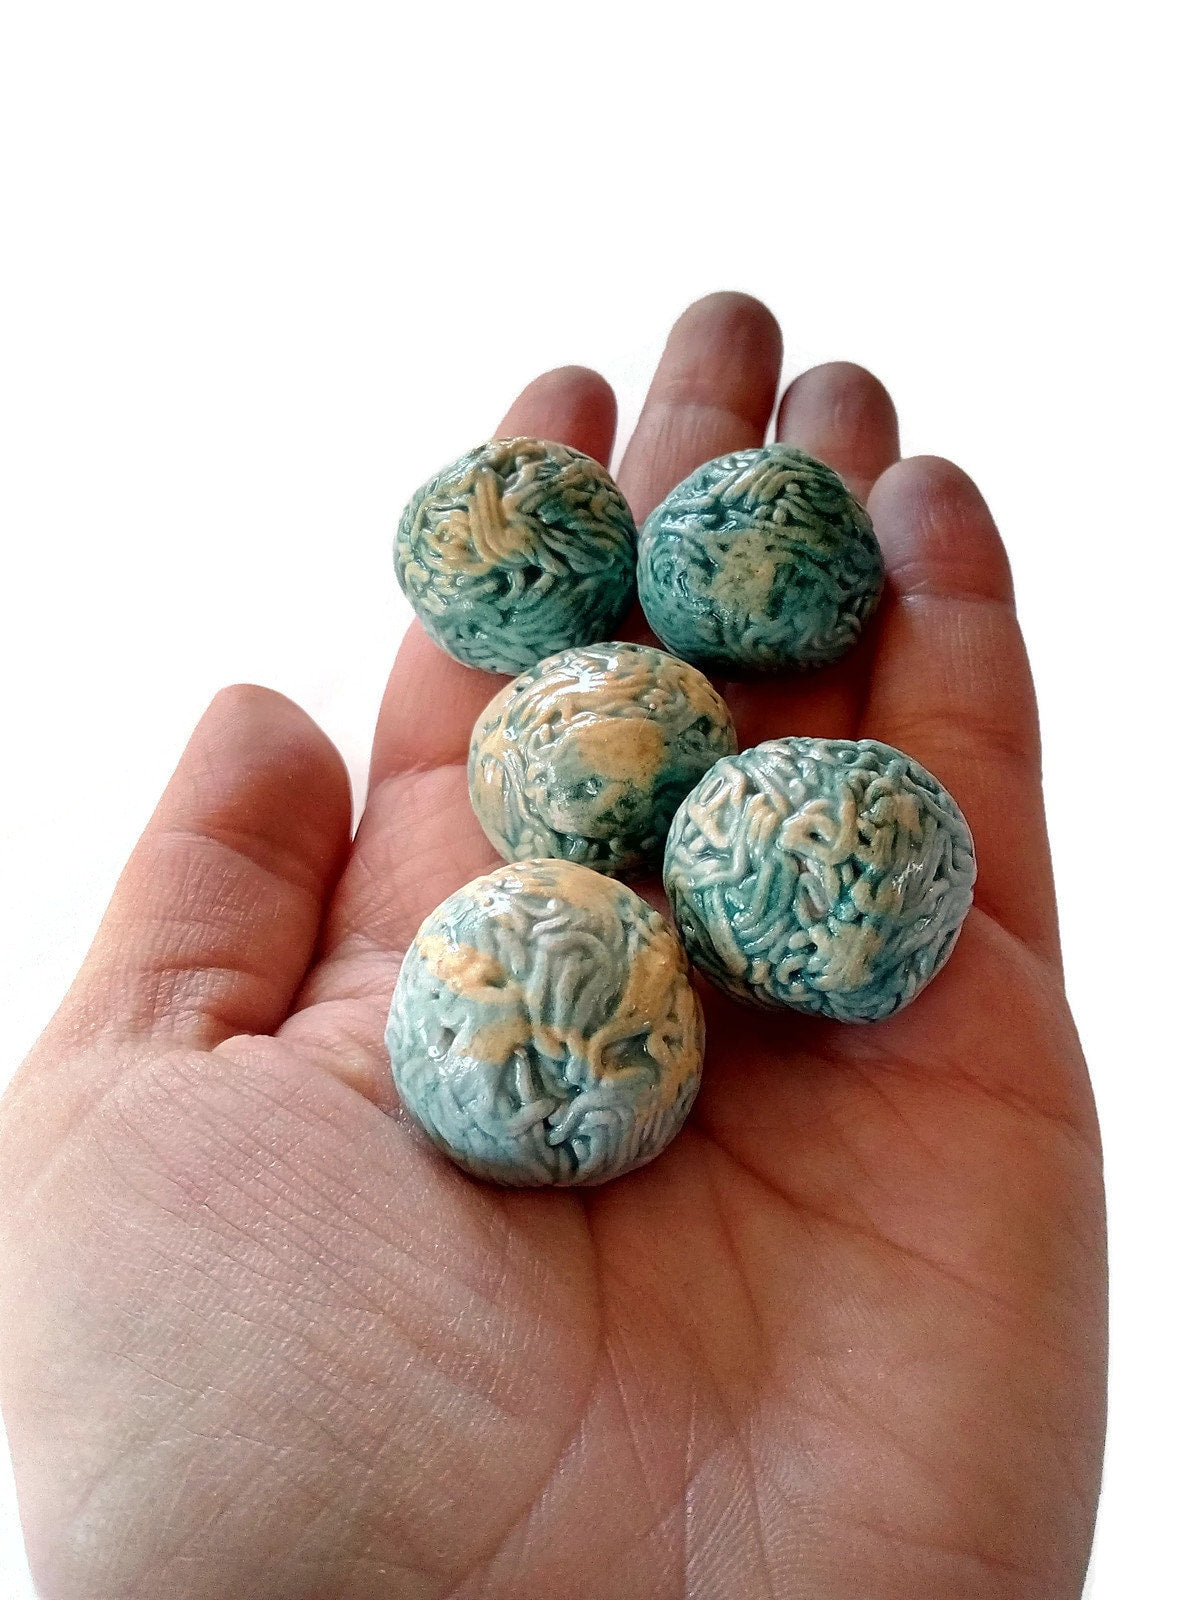 5Pc Green Assorted Round Cabochon Strange And Unusual, Handmade Ceramic Beads No Hole For Jewelry Making, Porcelain - Ceramica Ana Rafael